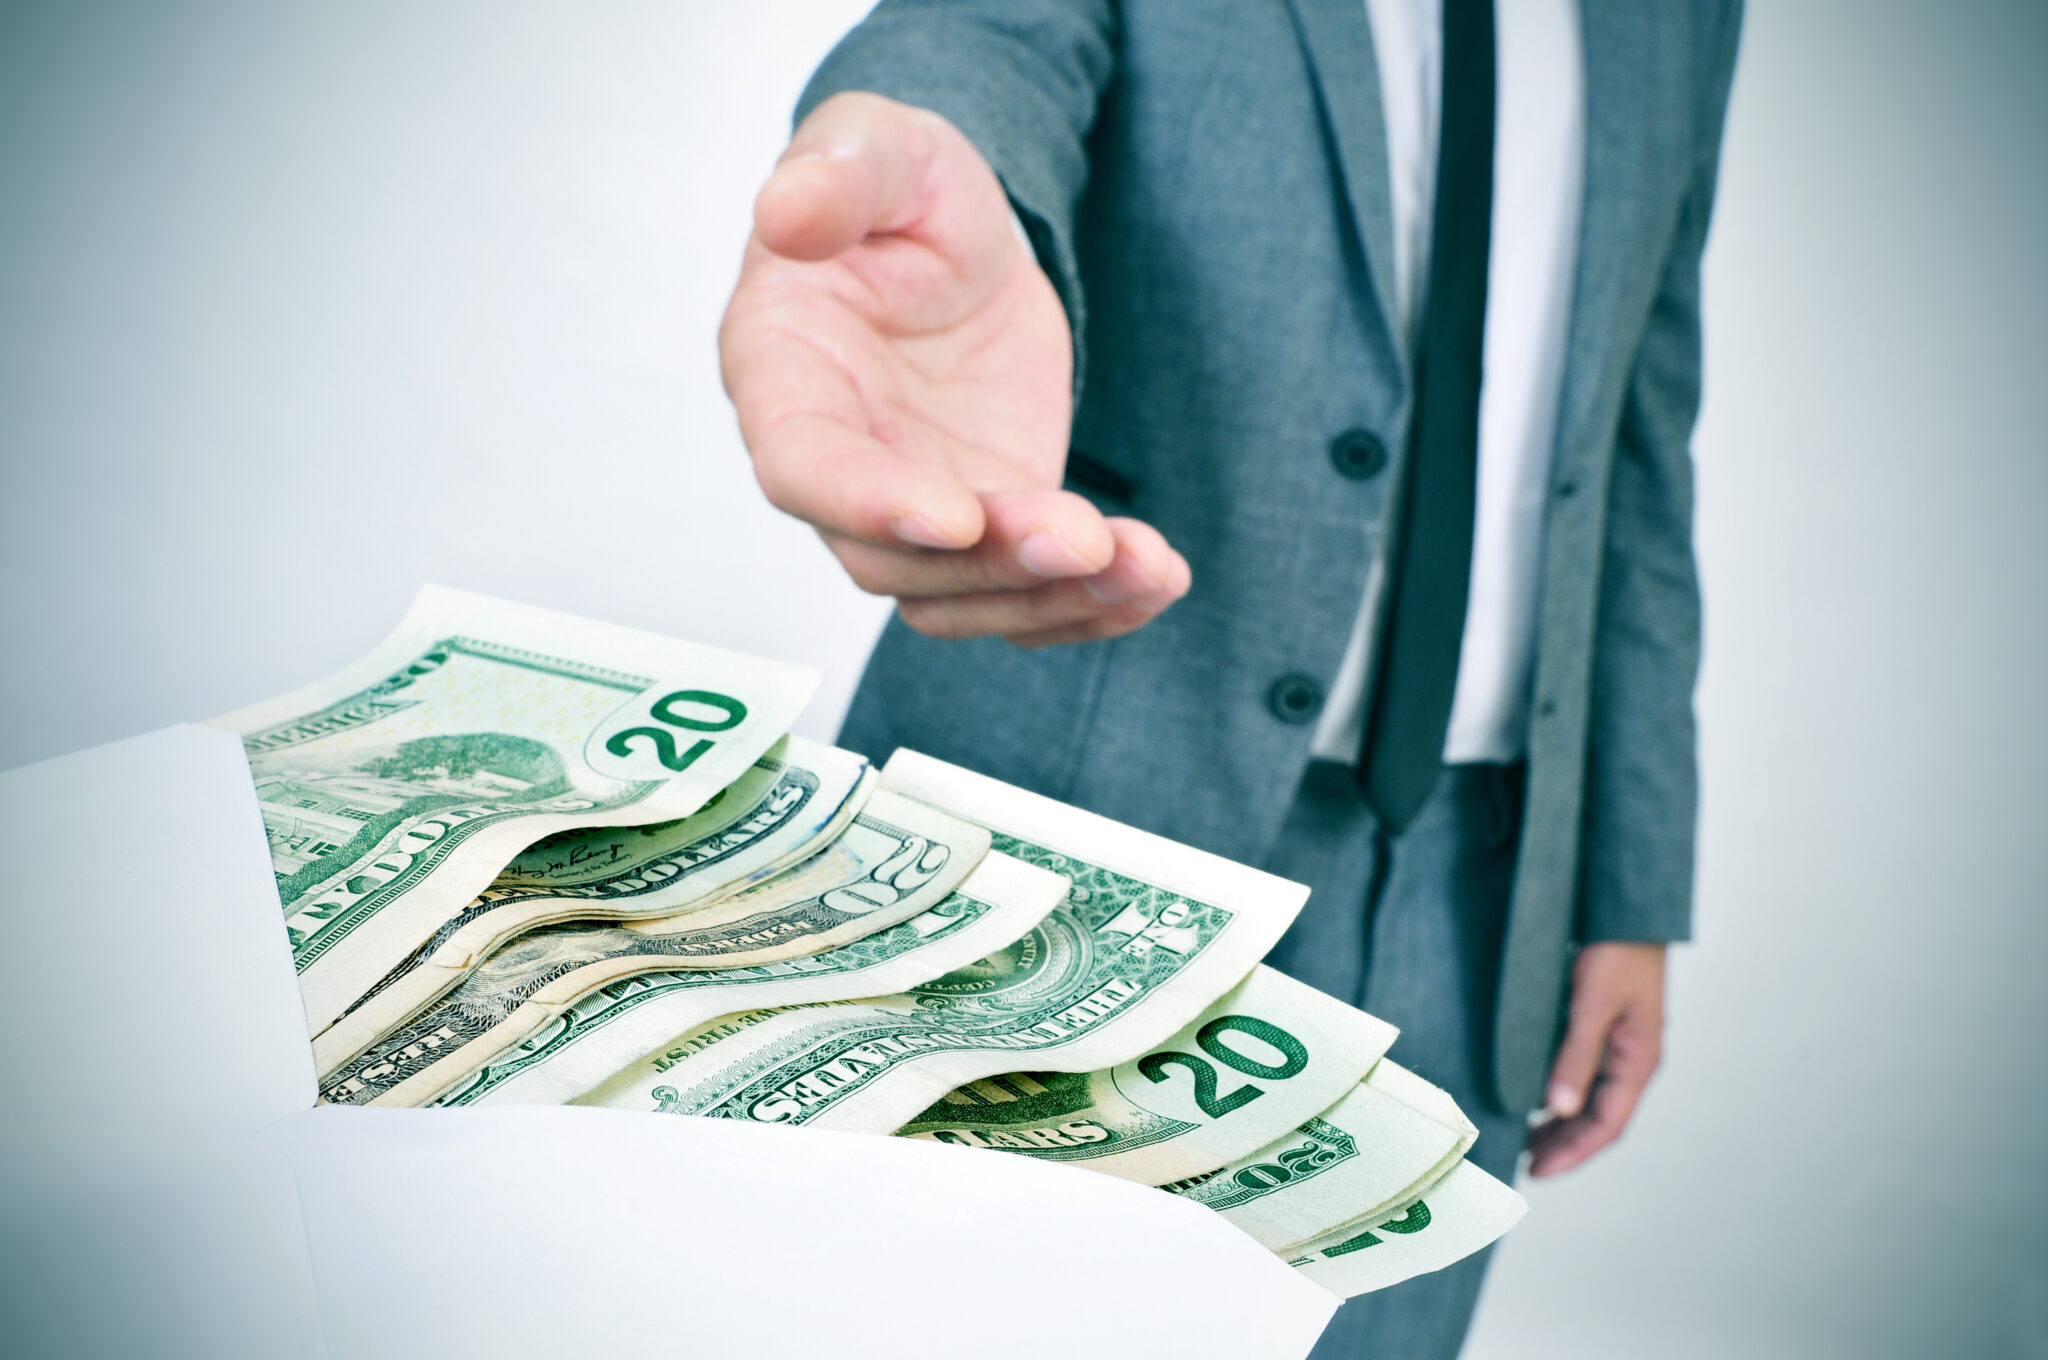 How Much Can I Collect in an Unpaid Wages Claim in Houston, Texas?